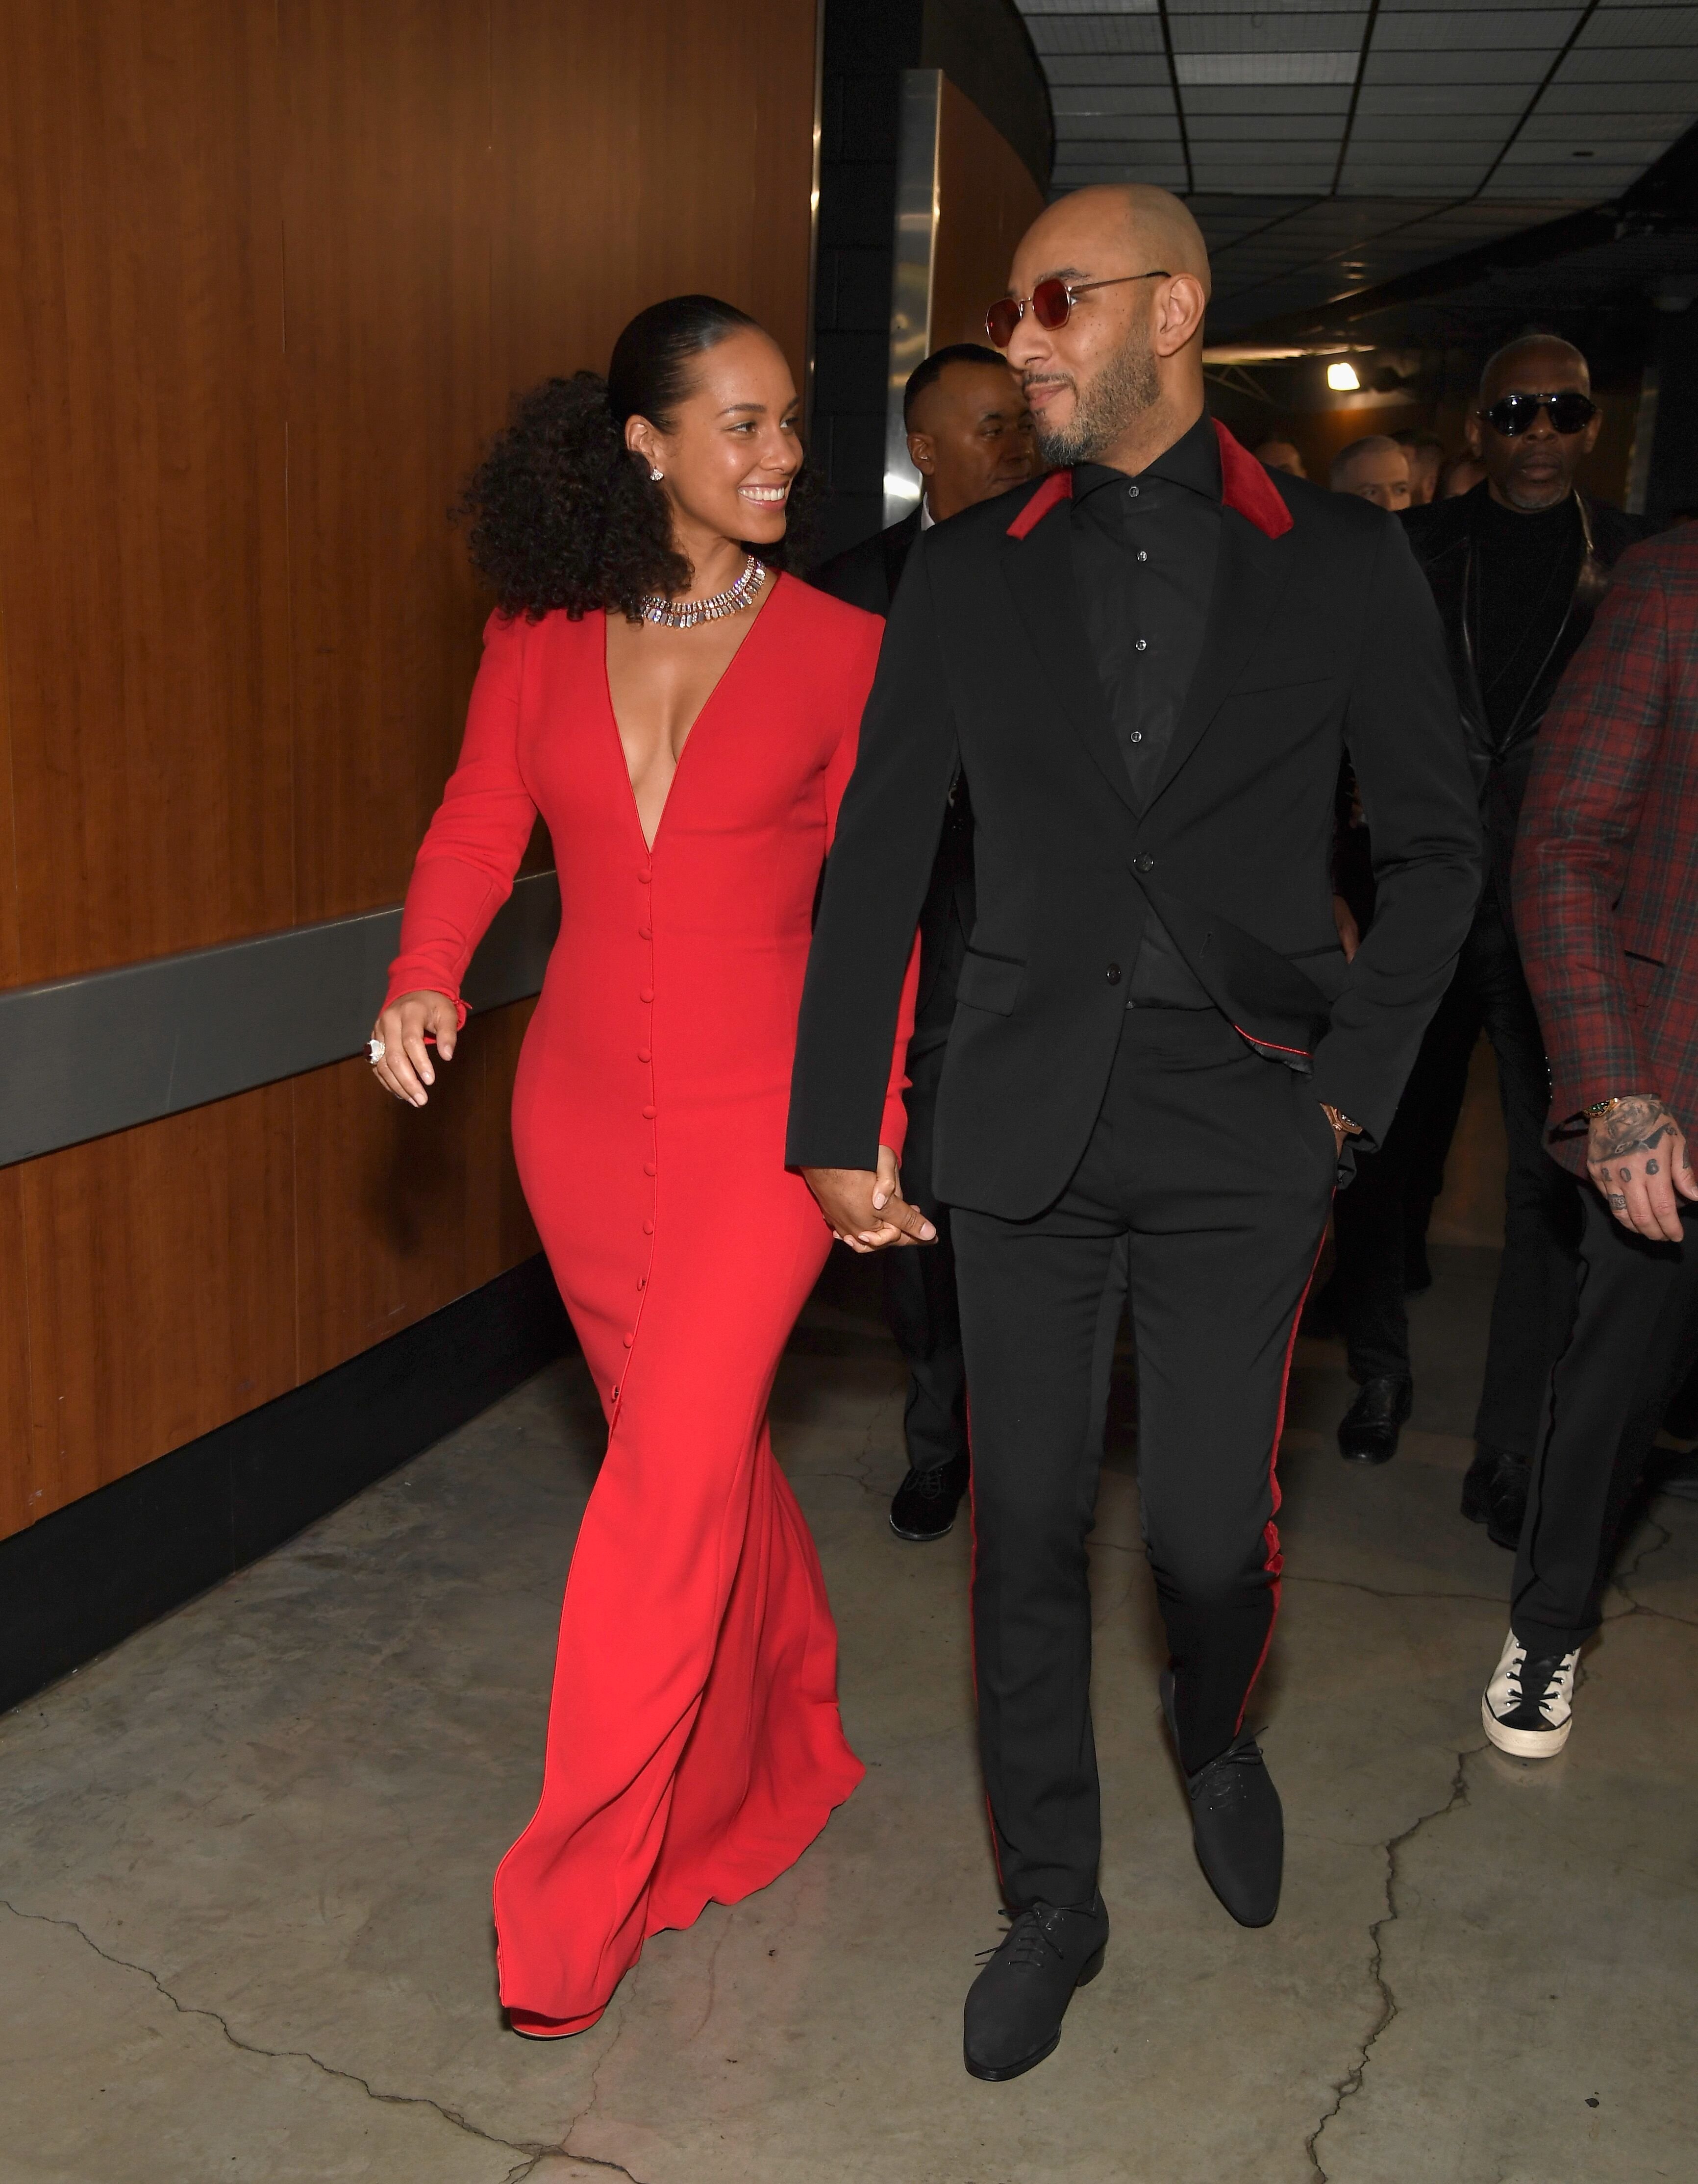 Alicia Keys and husband rapper Swizz Beatz backstage during the 61st Annual GRAMMY Awards at Staples Center | Photo: Getty Images